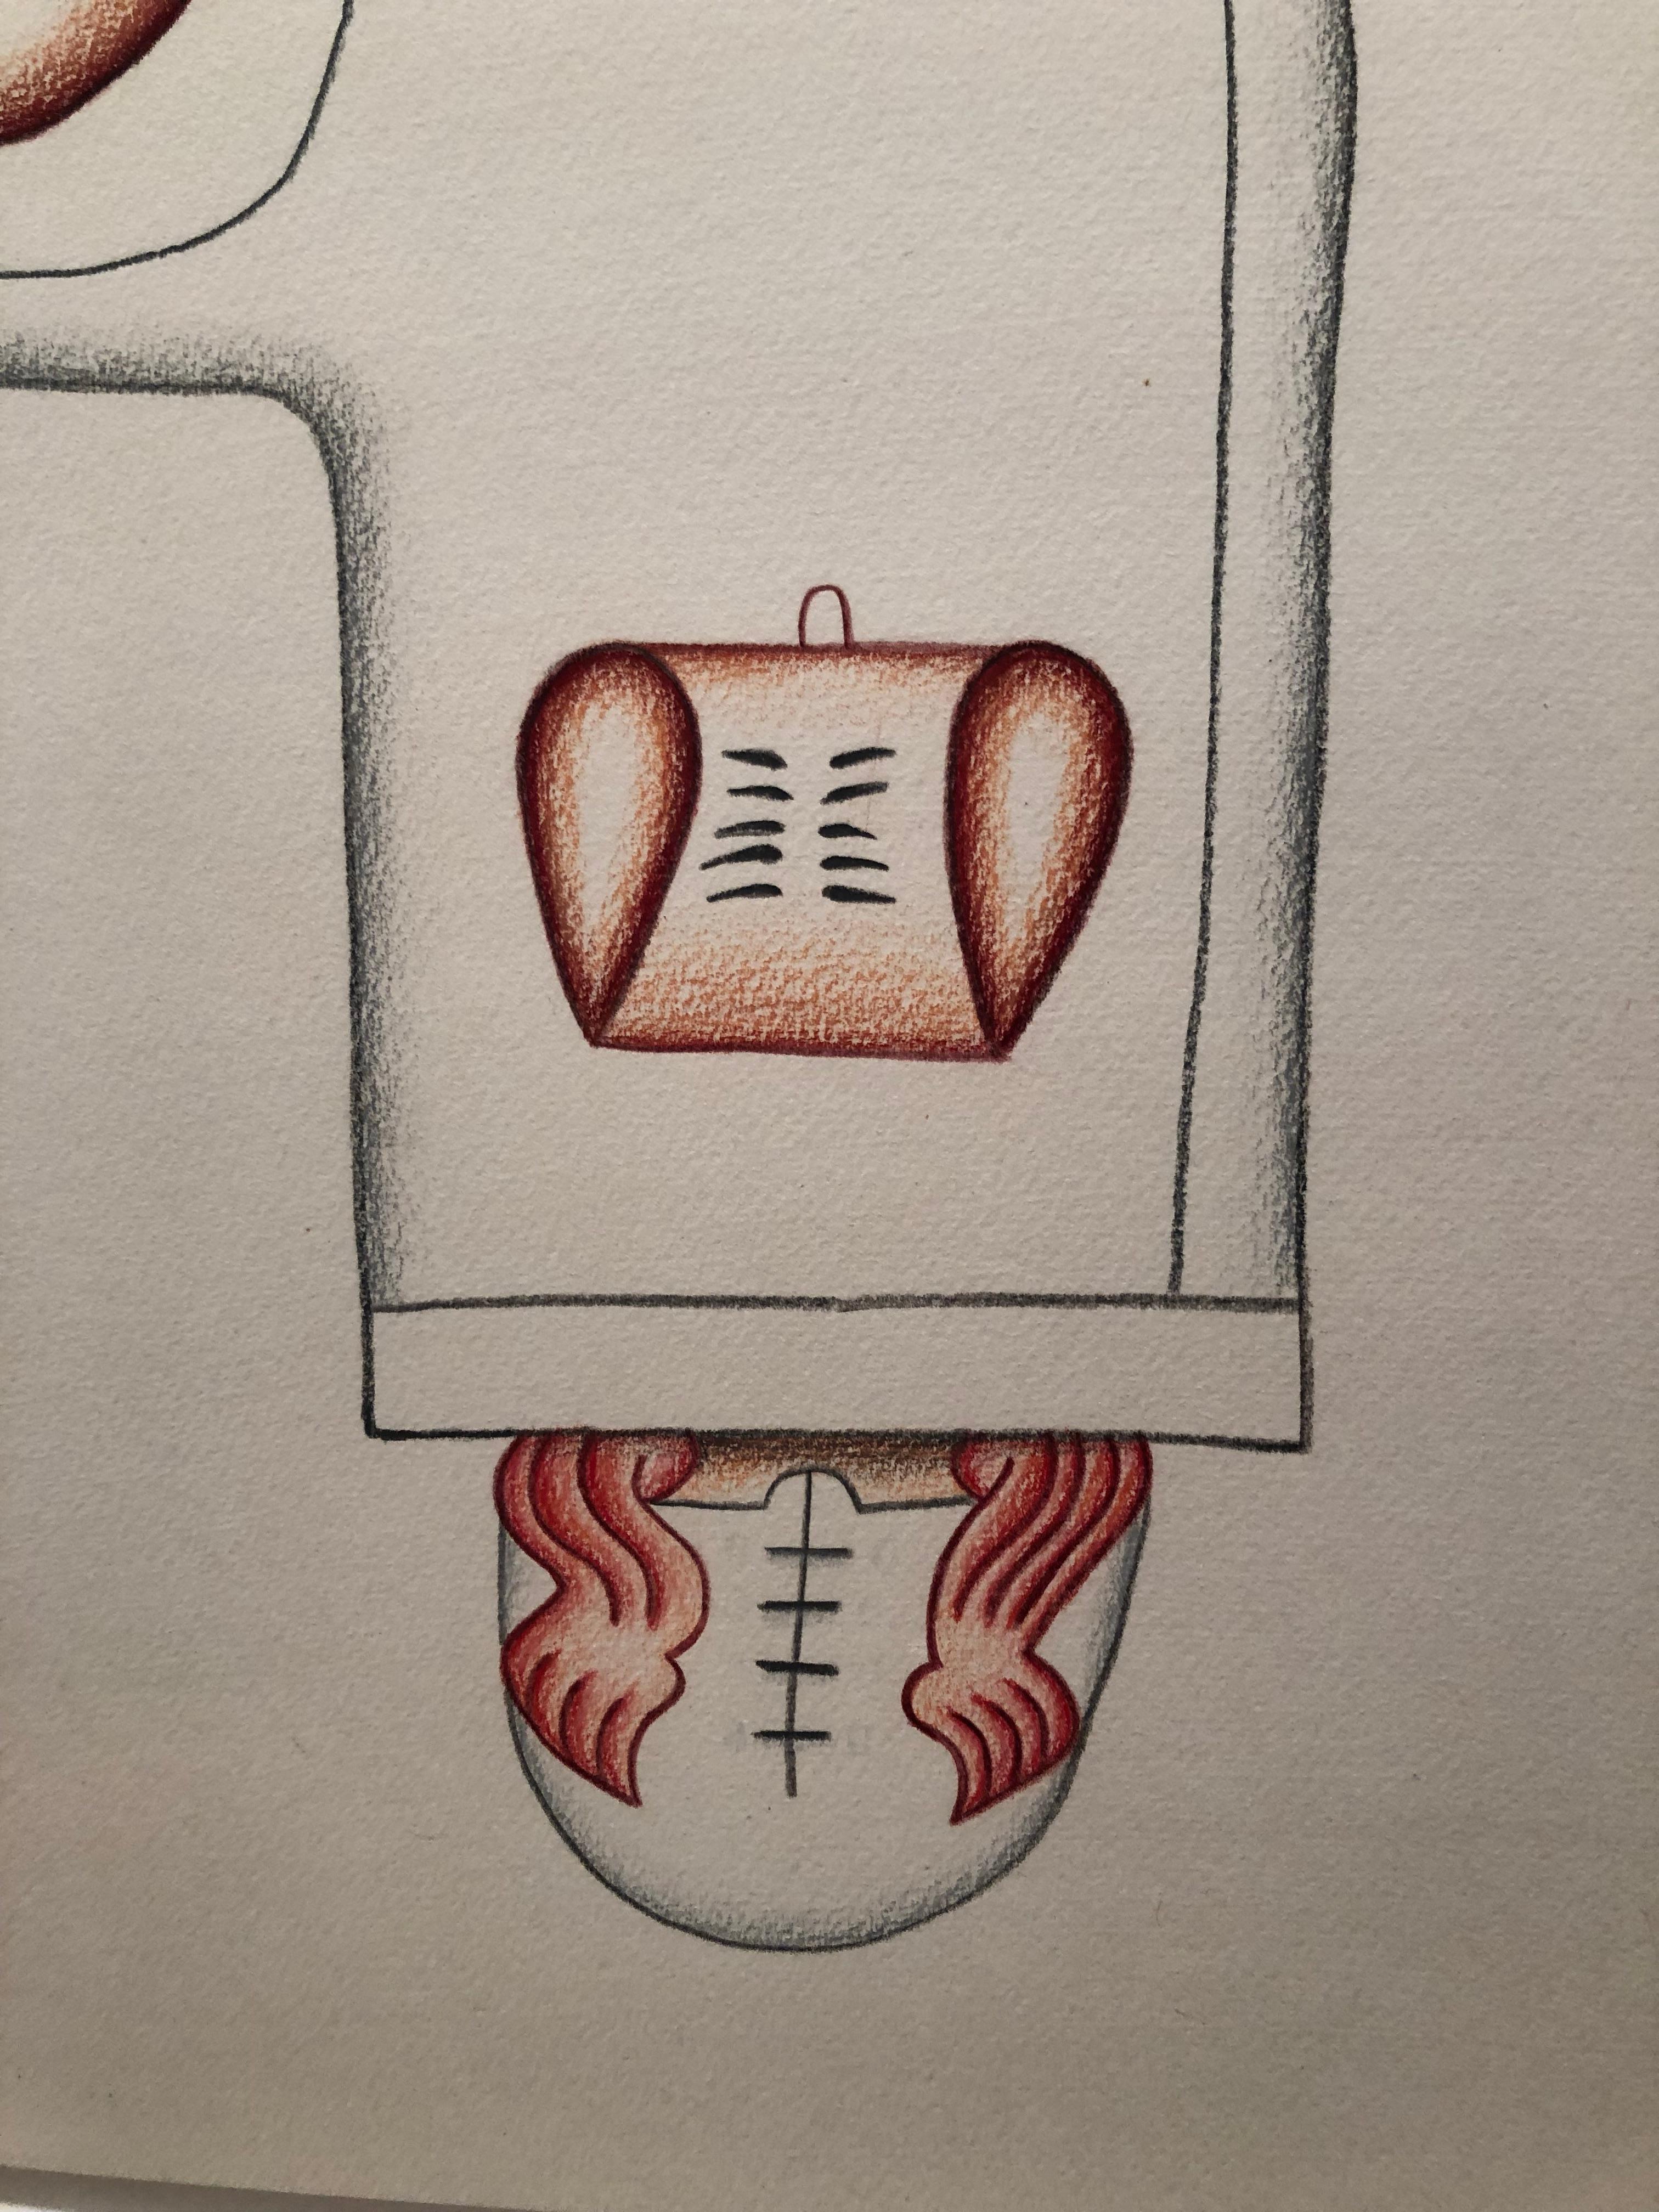 Karl Wirsum, Untitled, 1985, red and grey colored pencil on paper 
figurative drawing, surrealist cartoon, Chicago Imagist, robot, negative space

Karl Wirsum (b. 1939), as part of the Hairy Who group (along with James Falconer, Art Green, Gladys